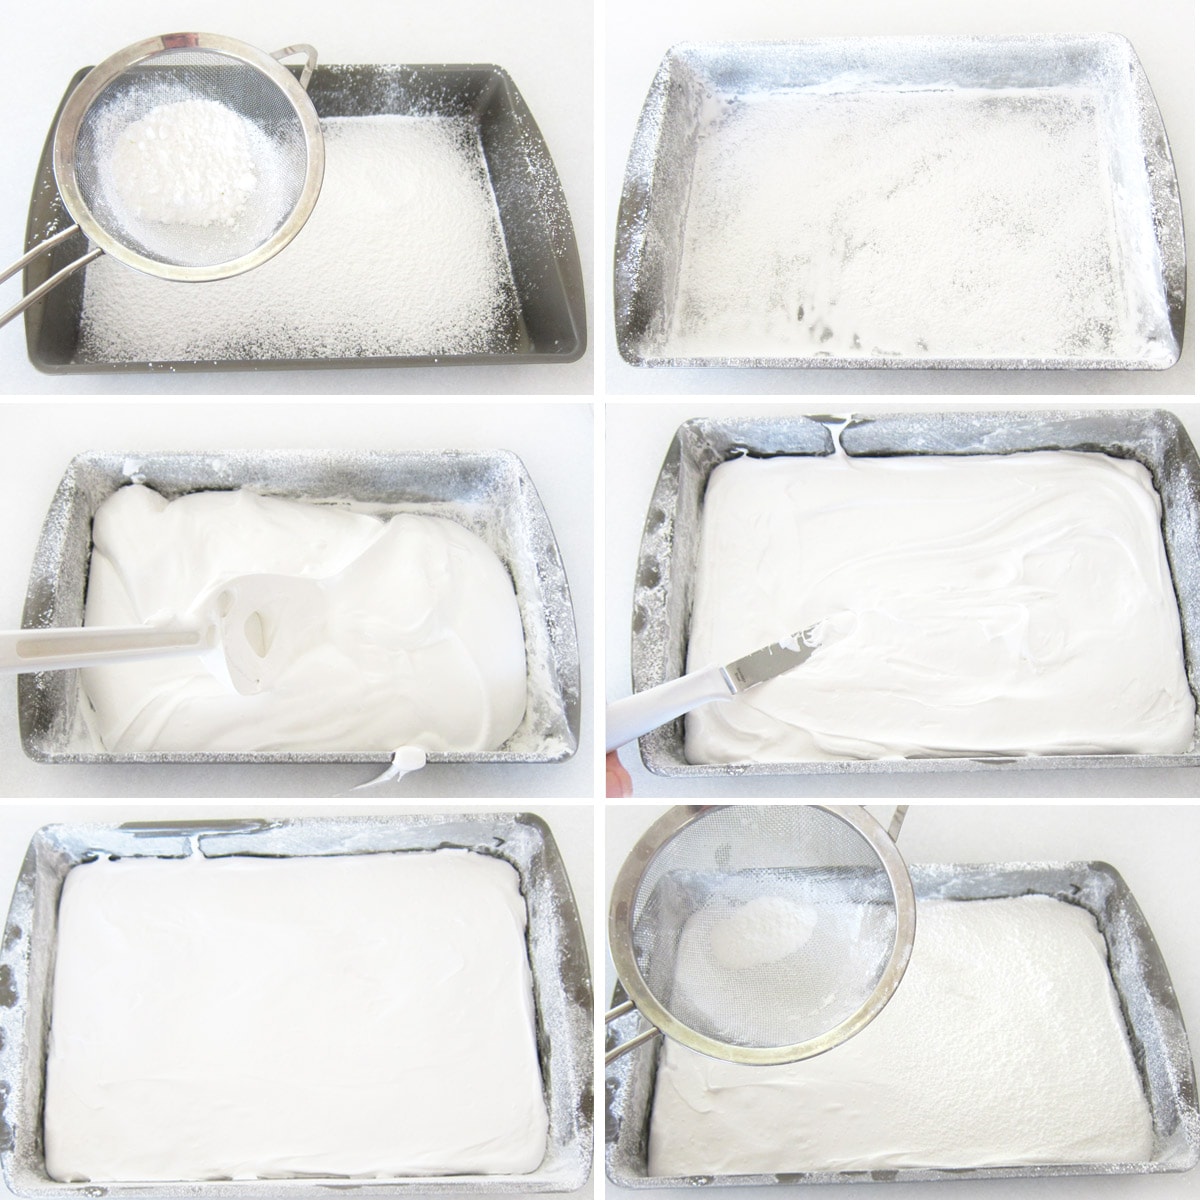 dust a 9x13-inch pan with cornstarch, spread marshmallows into an even layer, dust more cornstarch on top.